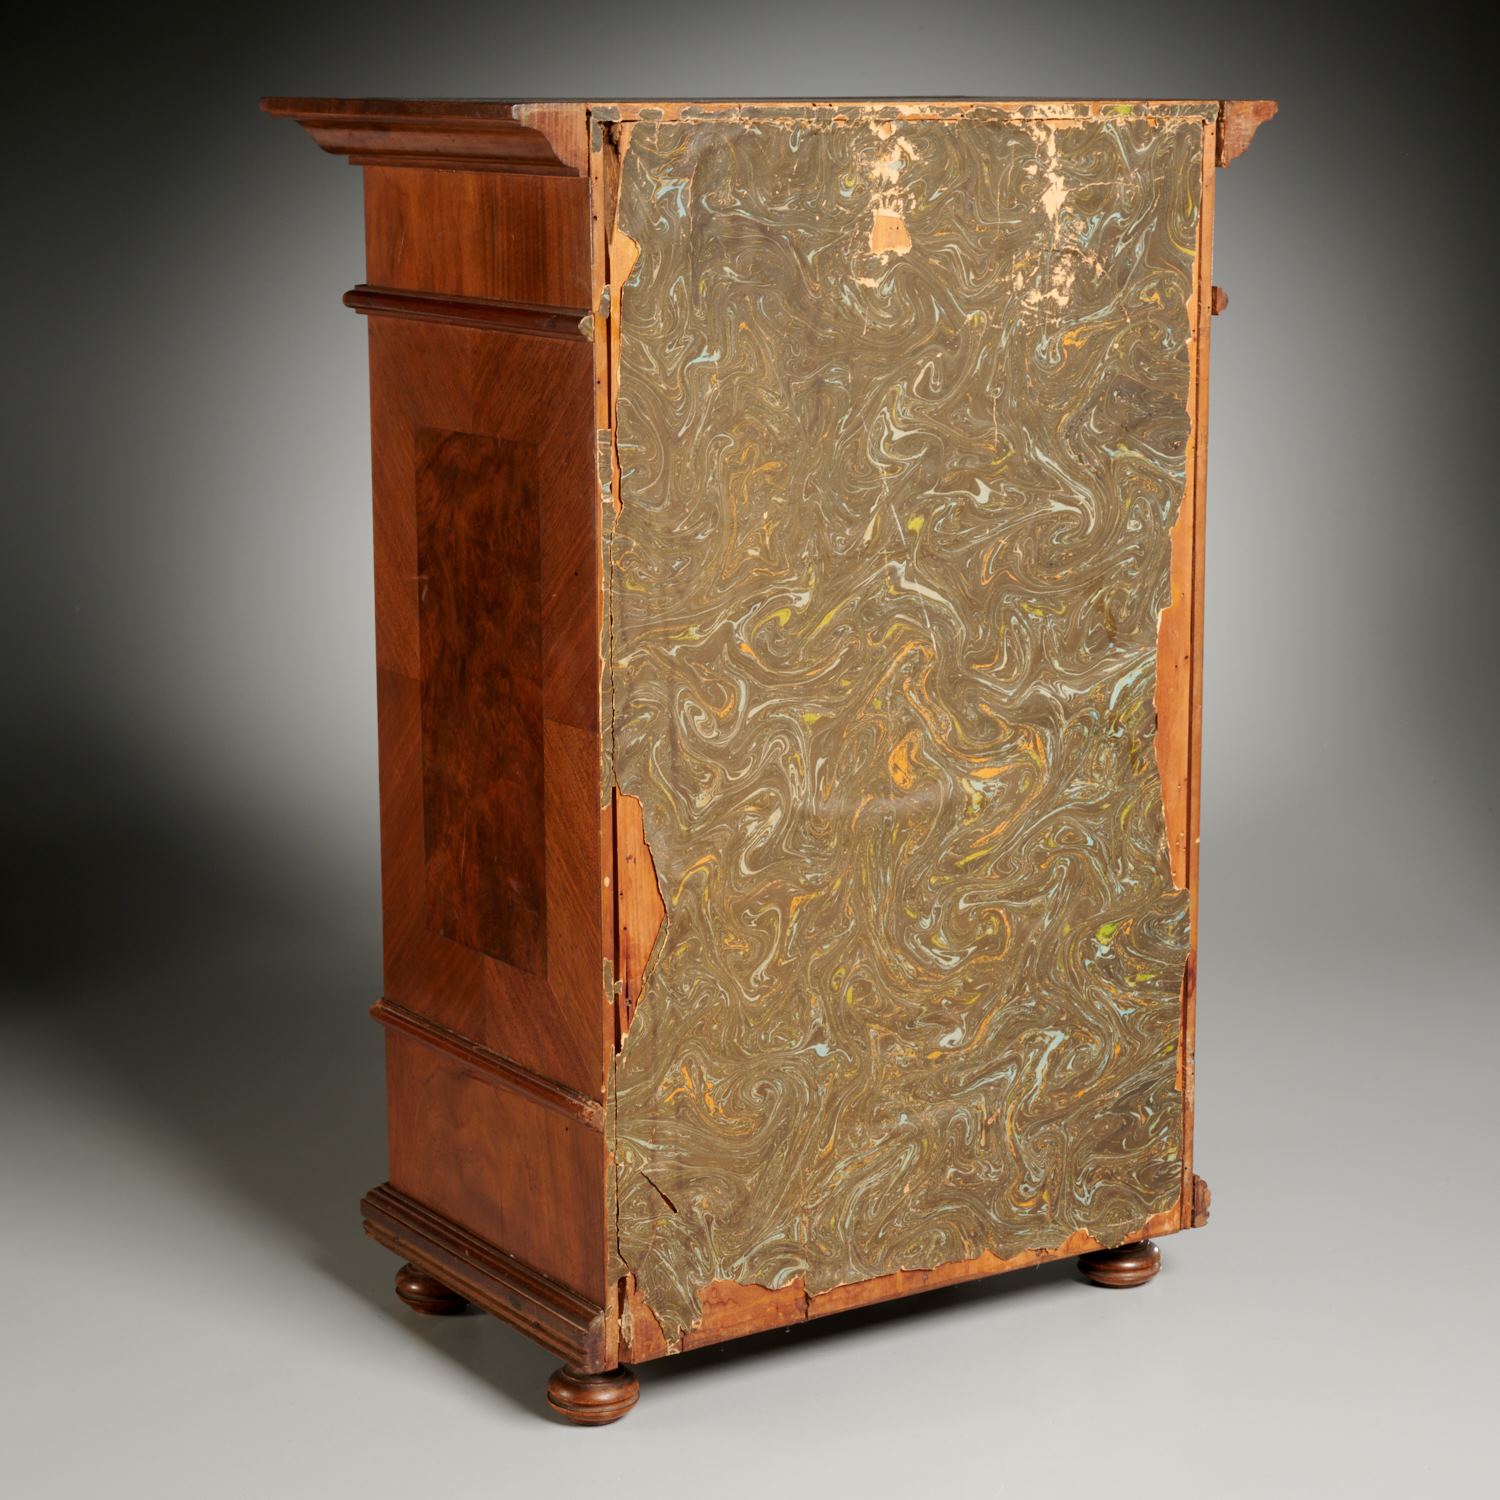 Continental Neoclassic marquetry tabletop cabinet - Image 8 of 8